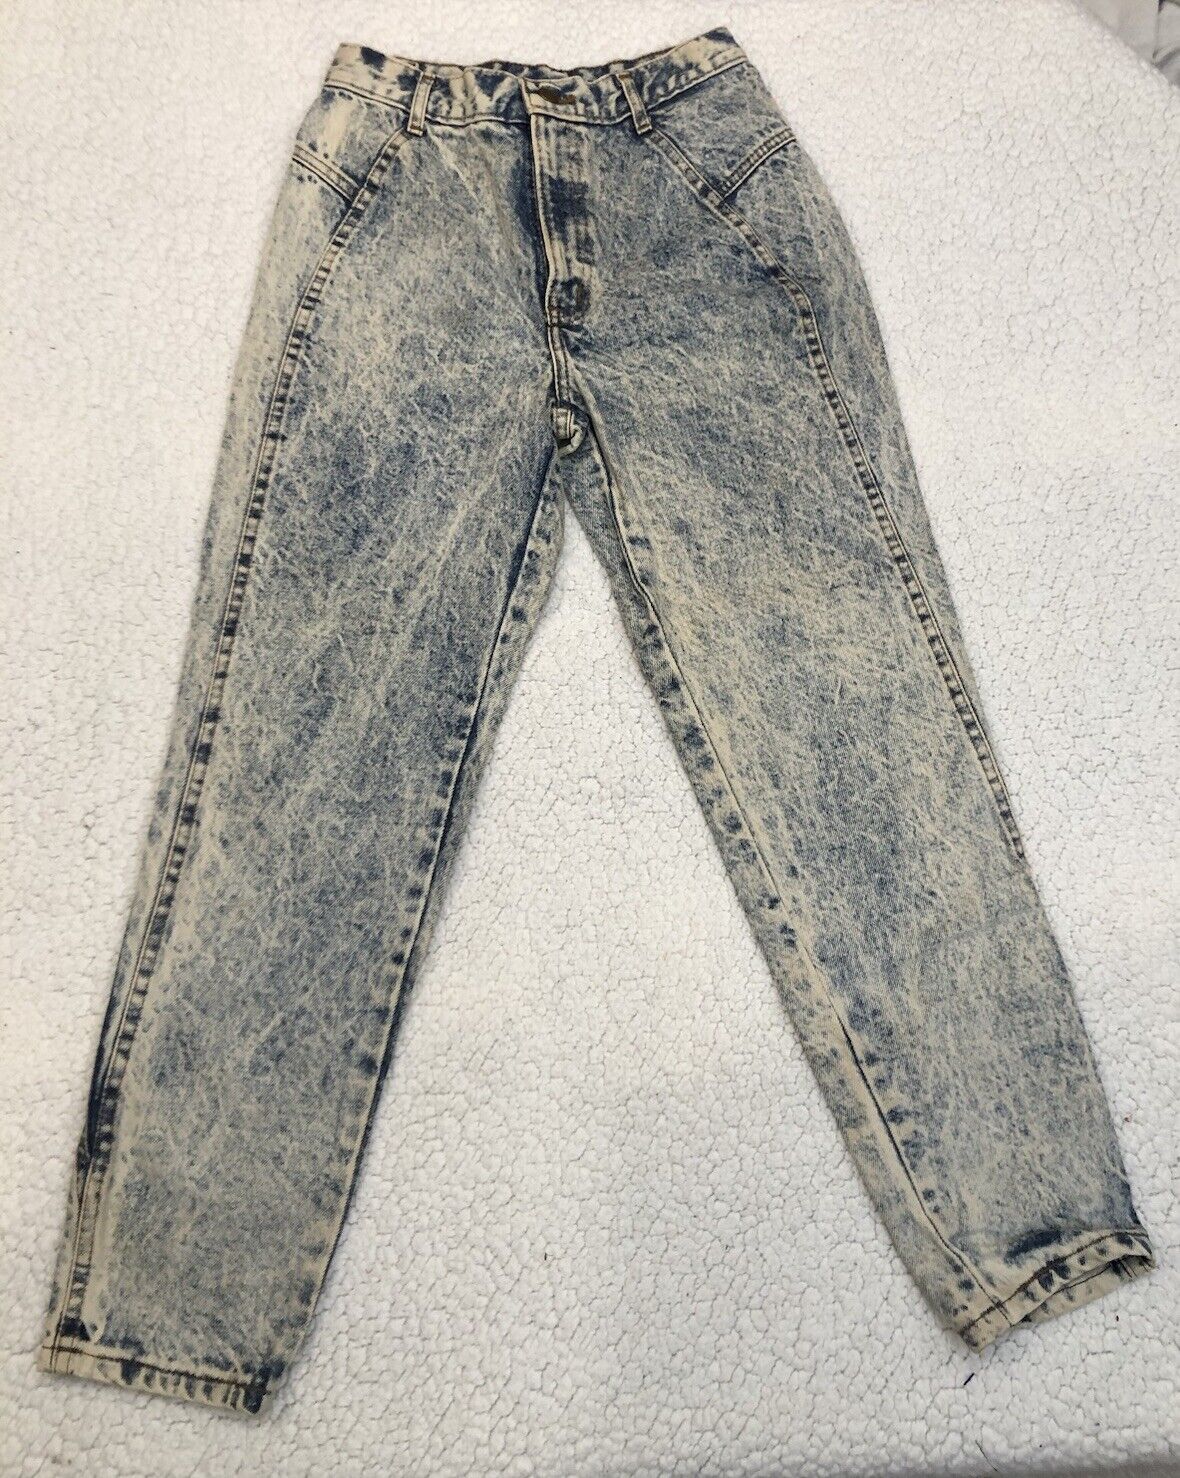 Vtg Chic Jeans High Waisted Acid Wash Size 9 Petite Women’s USA